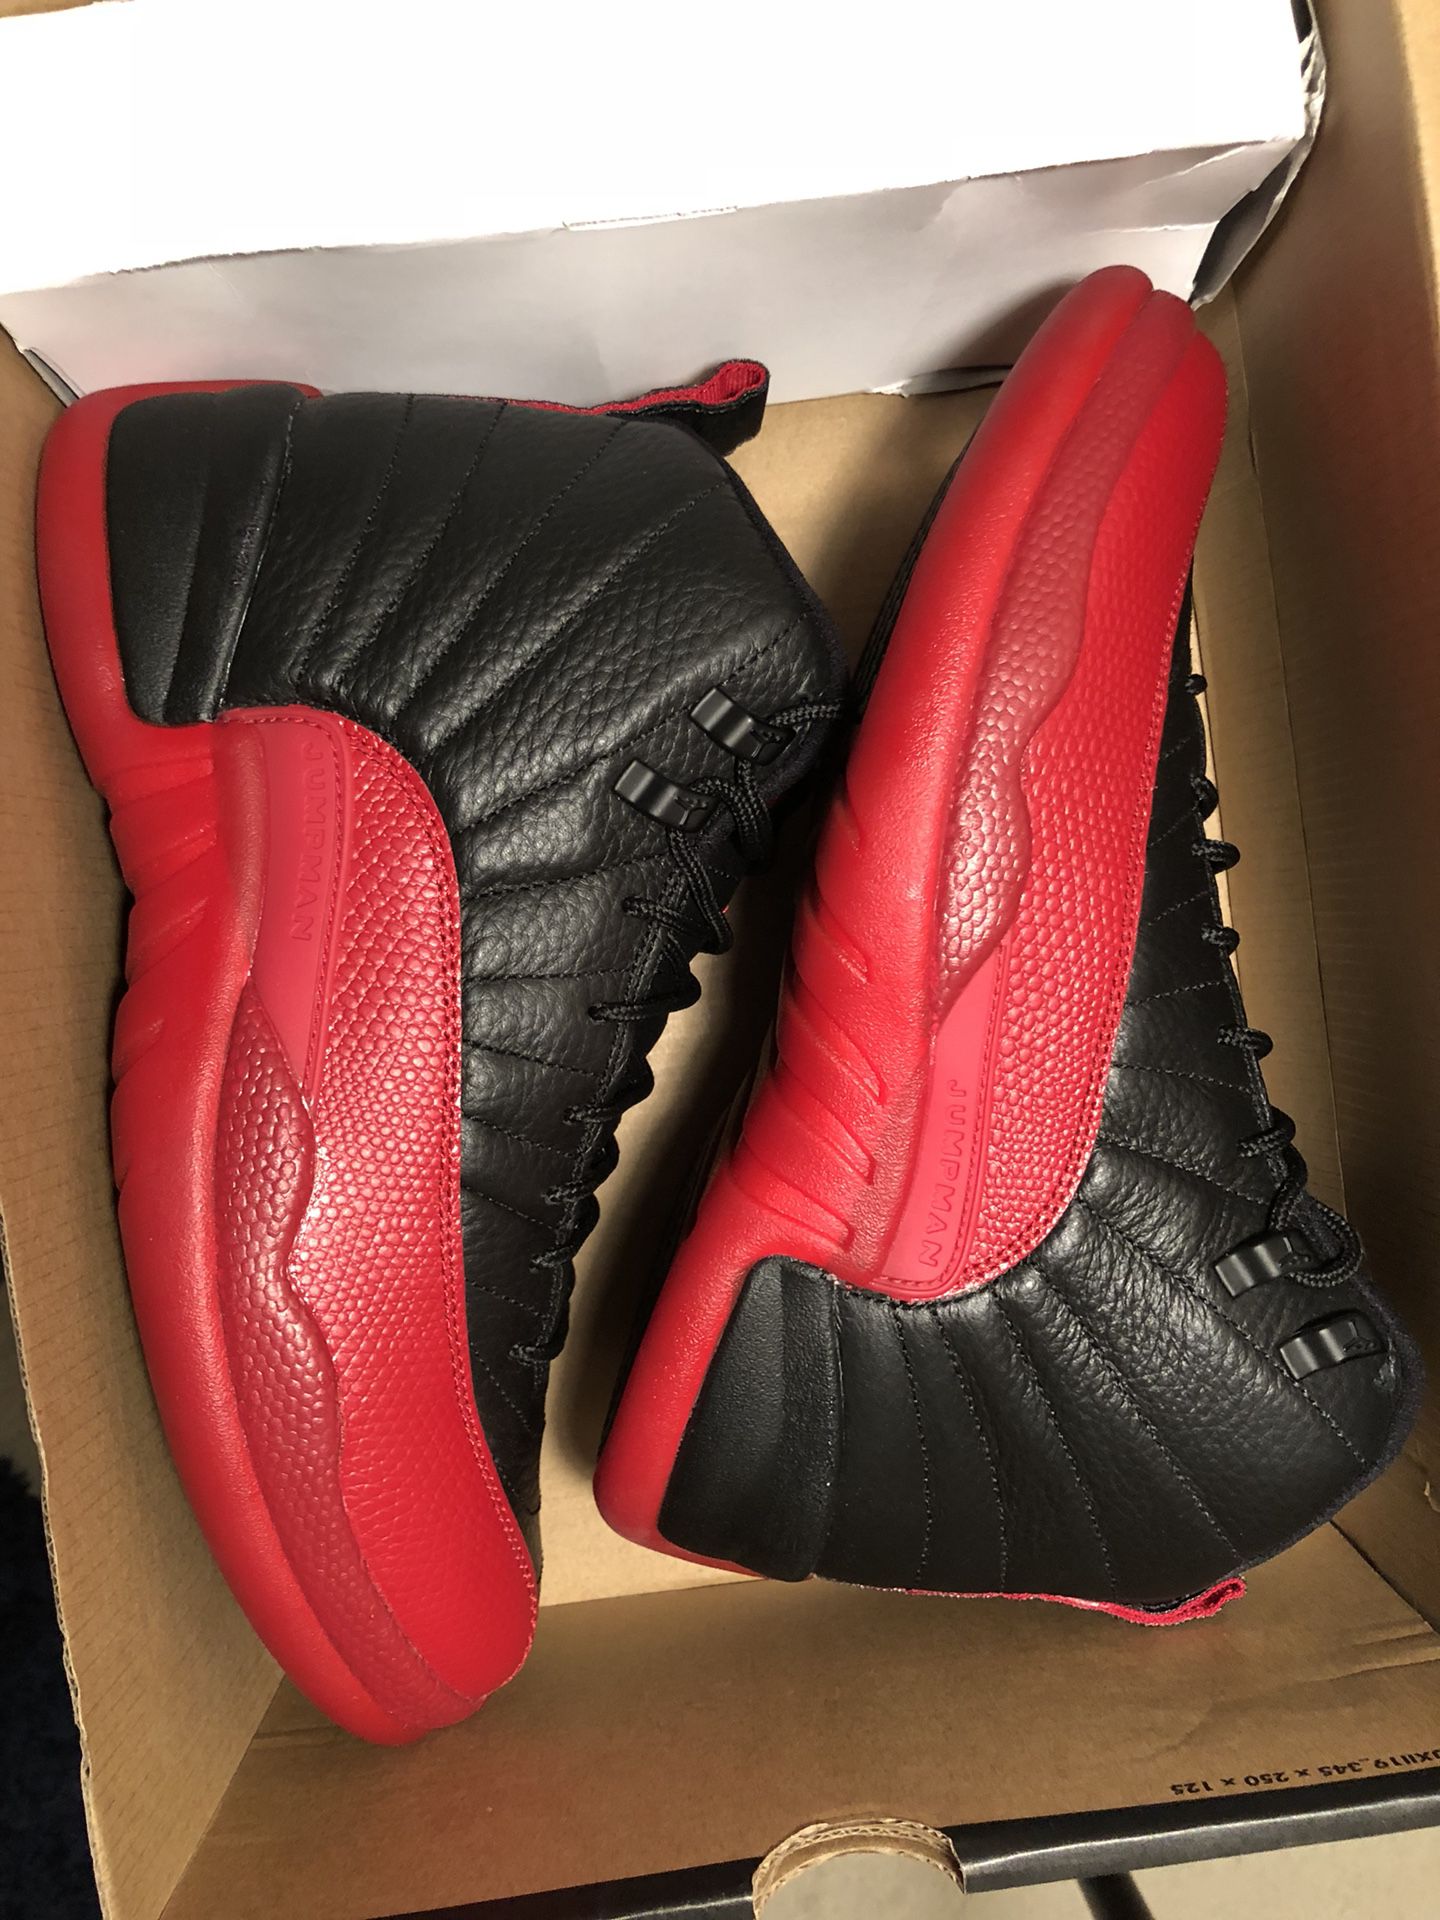 JORDAN 12 FLU GAME BLACK RED BRED 2016 SIZE 8 BRAND NEW AUTHENTIC